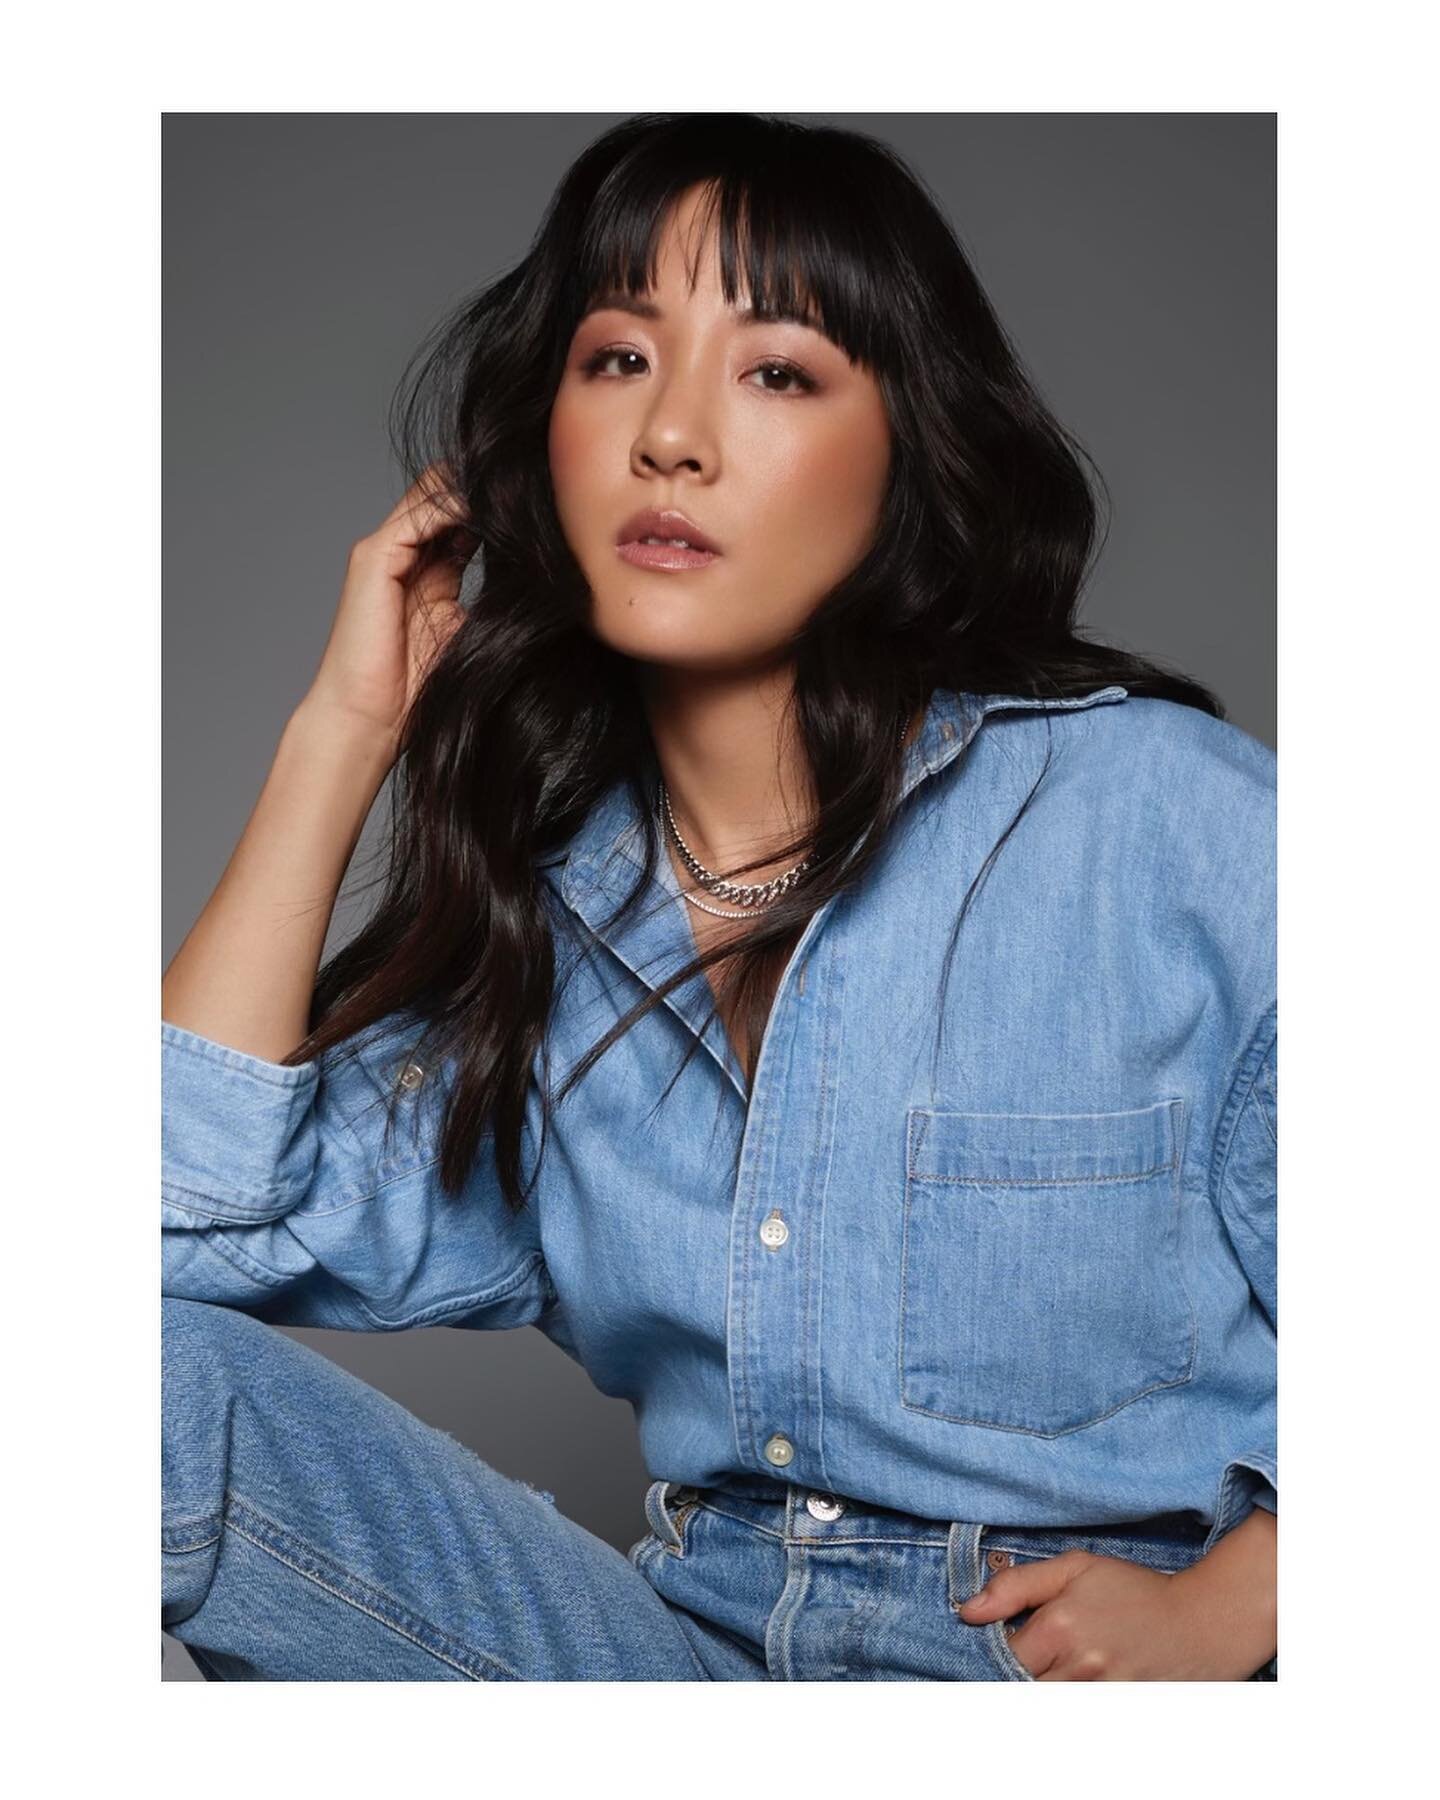 Constance Wu promoting her new book: photos published in #harpersbazaar and #peoplemagazine  #𝐒𝐭𝐲𝐥𝐞𝐝𝐛𝐲𝐦𝐞